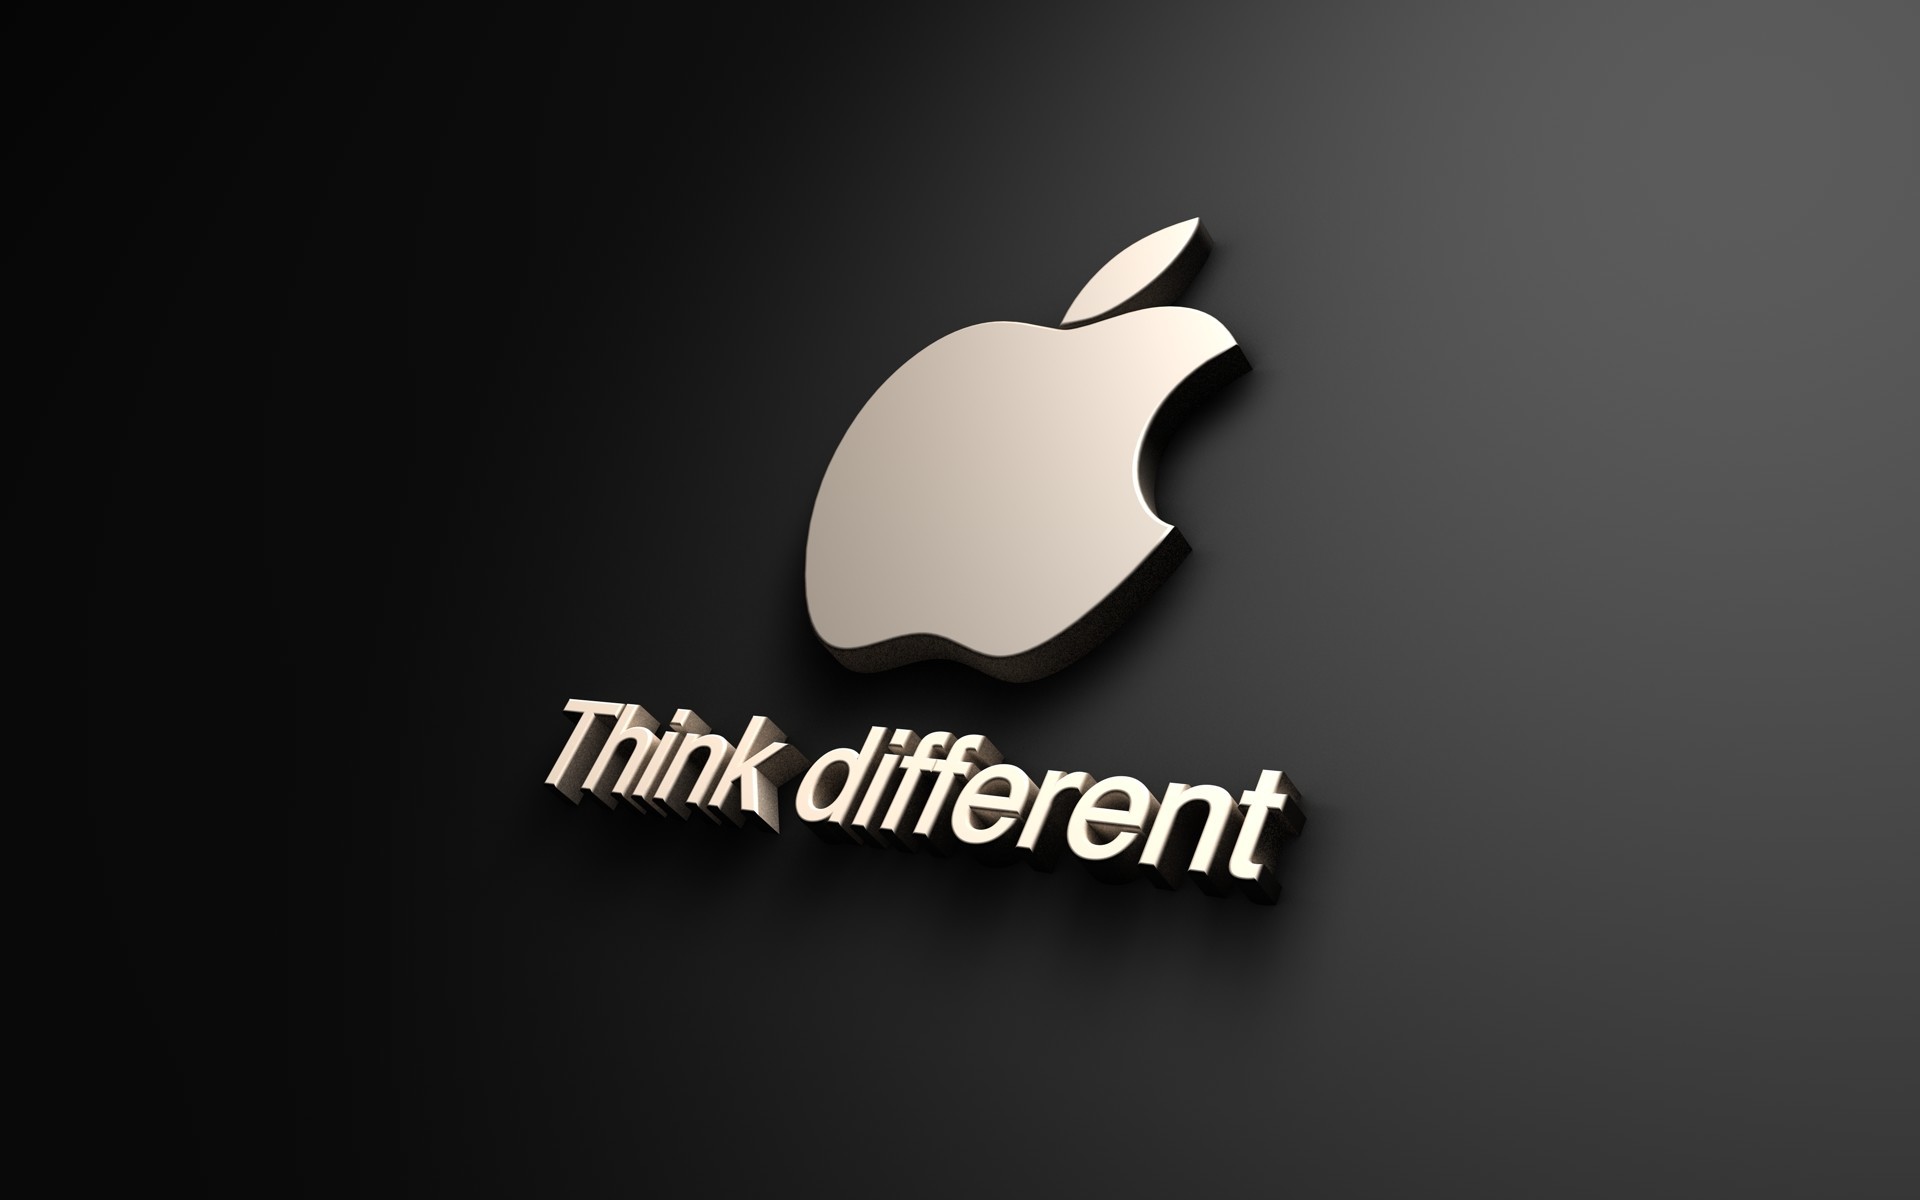 1920x1200 968659 Most Popular Think Different Wallpapers 1920Ã1200 Wallpaper